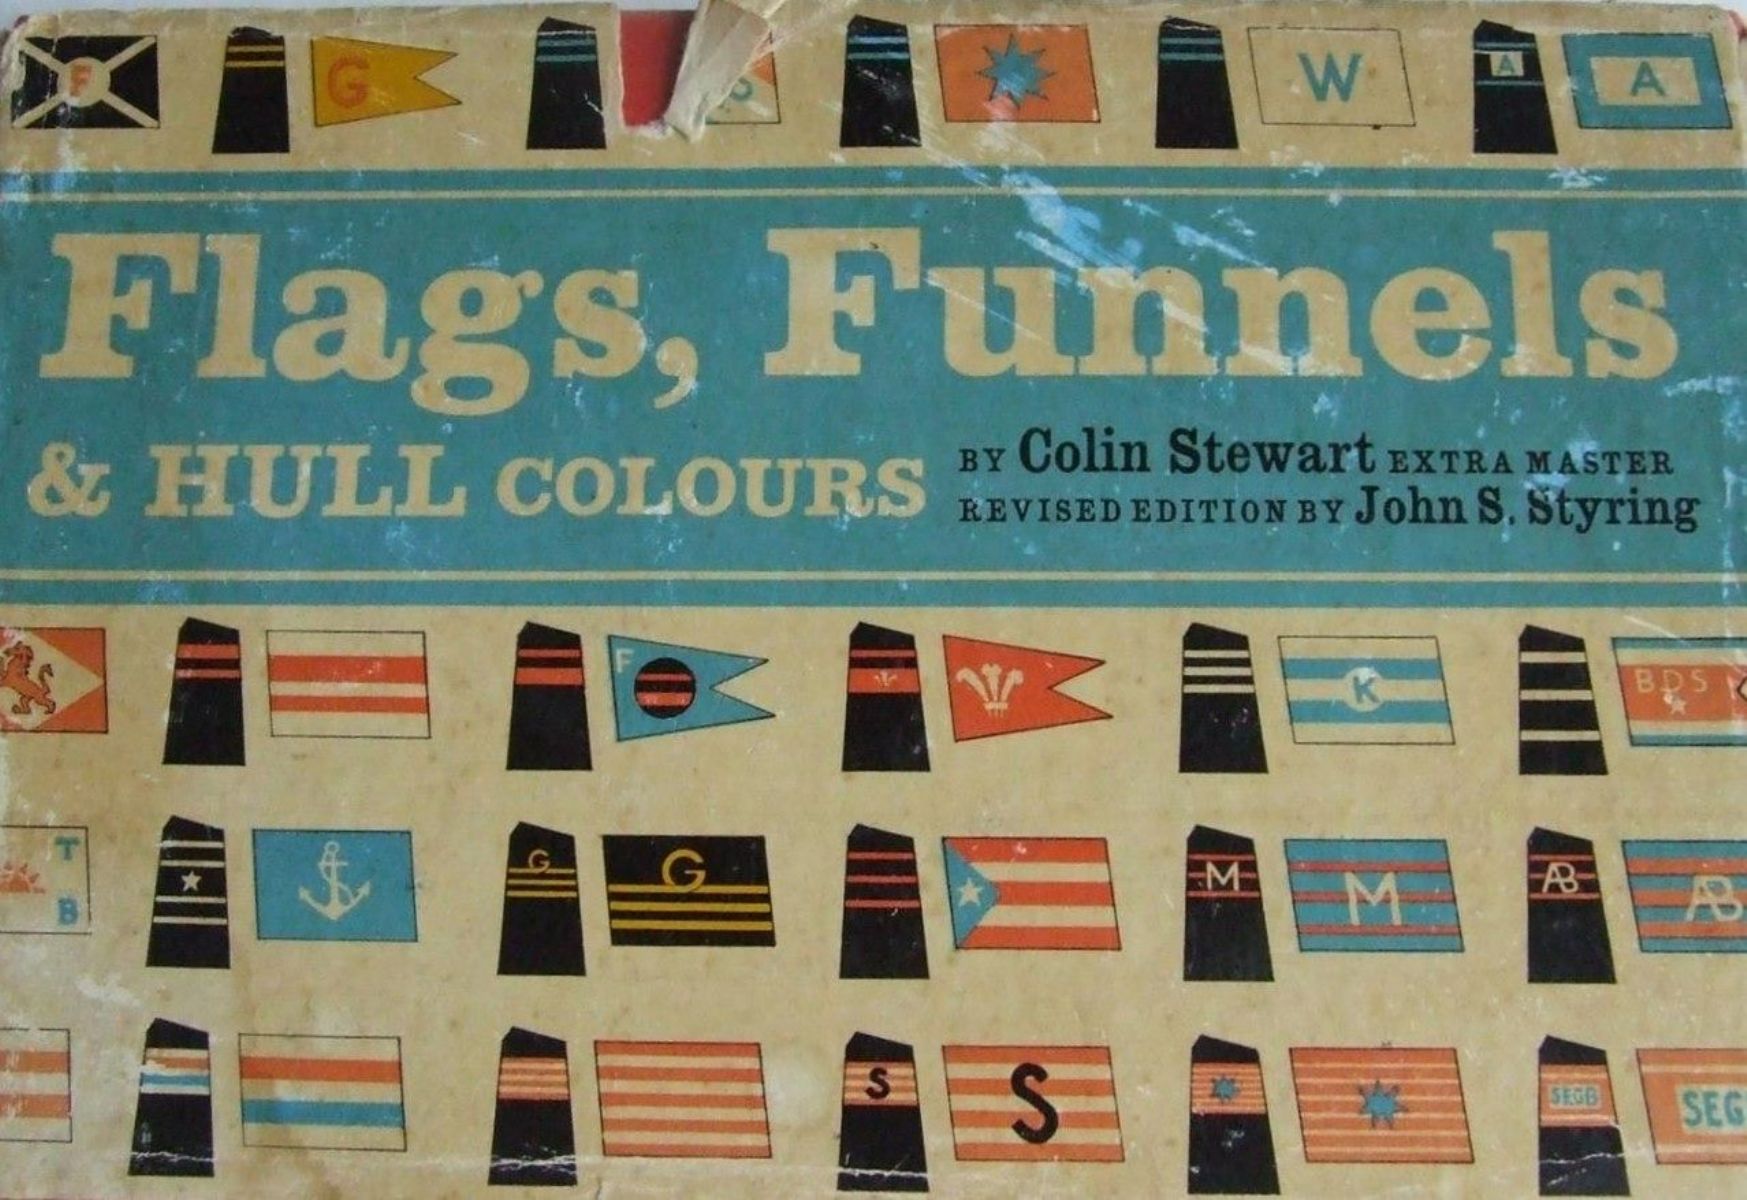 Flags, Funnels and Hull Colours